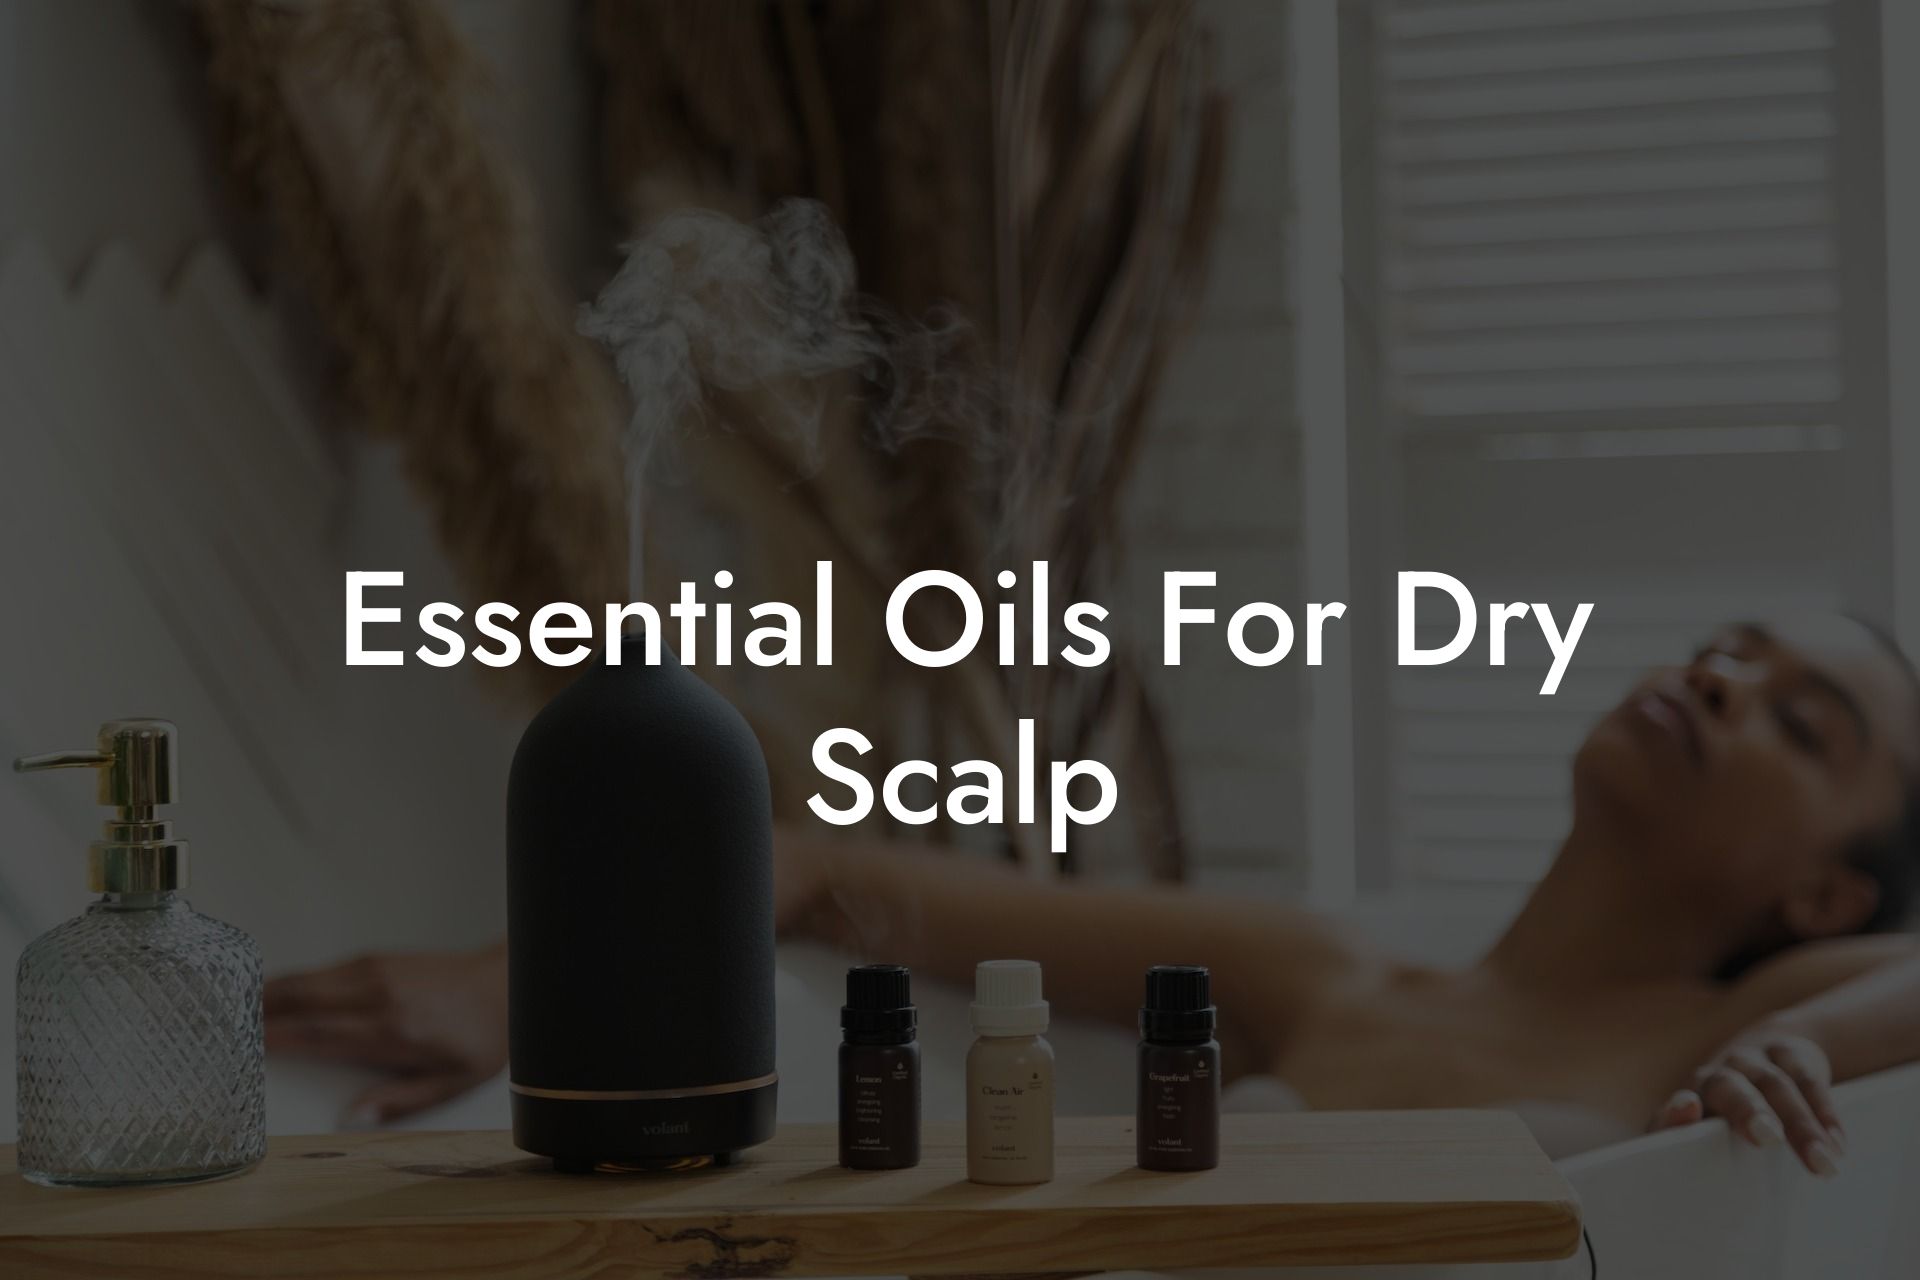 Essential Oils For Dry Scalp